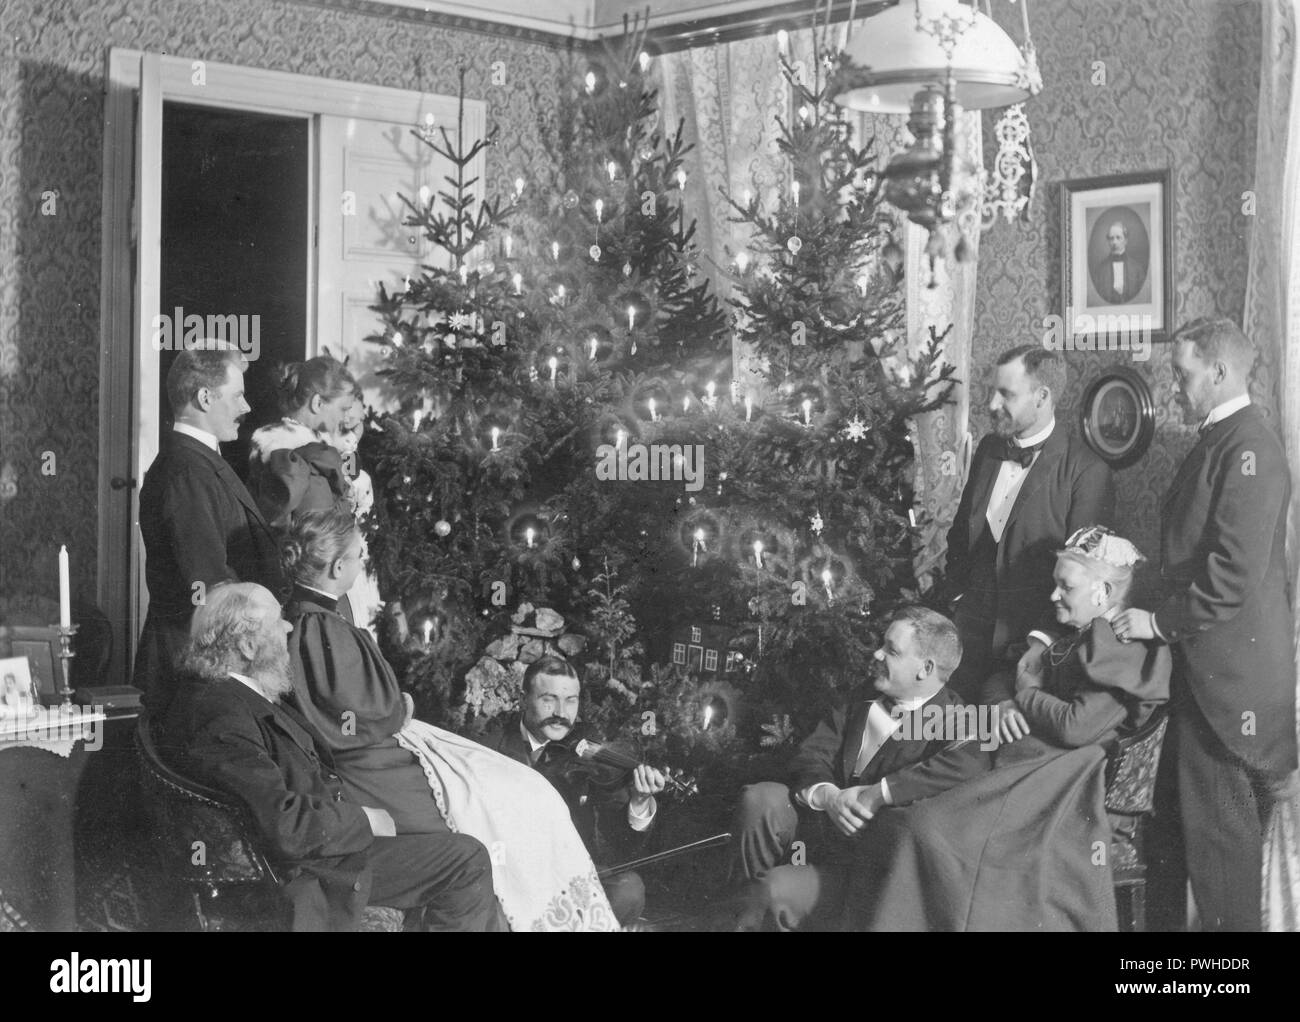 Christmas 1896. A family has gathered to celebrate christmas and they have christmas trees with lit candles in them to enjoy. The family is all dressed up in their finest clothes and a man is playing the violin.  Sweden 1896 Stock Photo